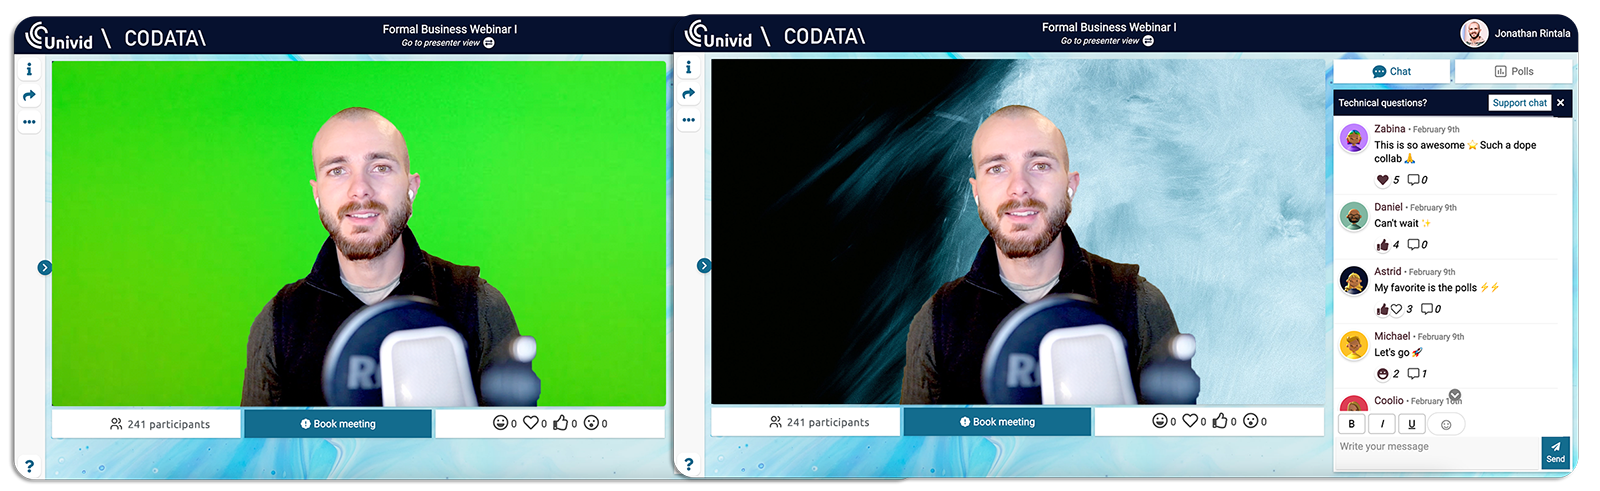 green screen before and after in Univid